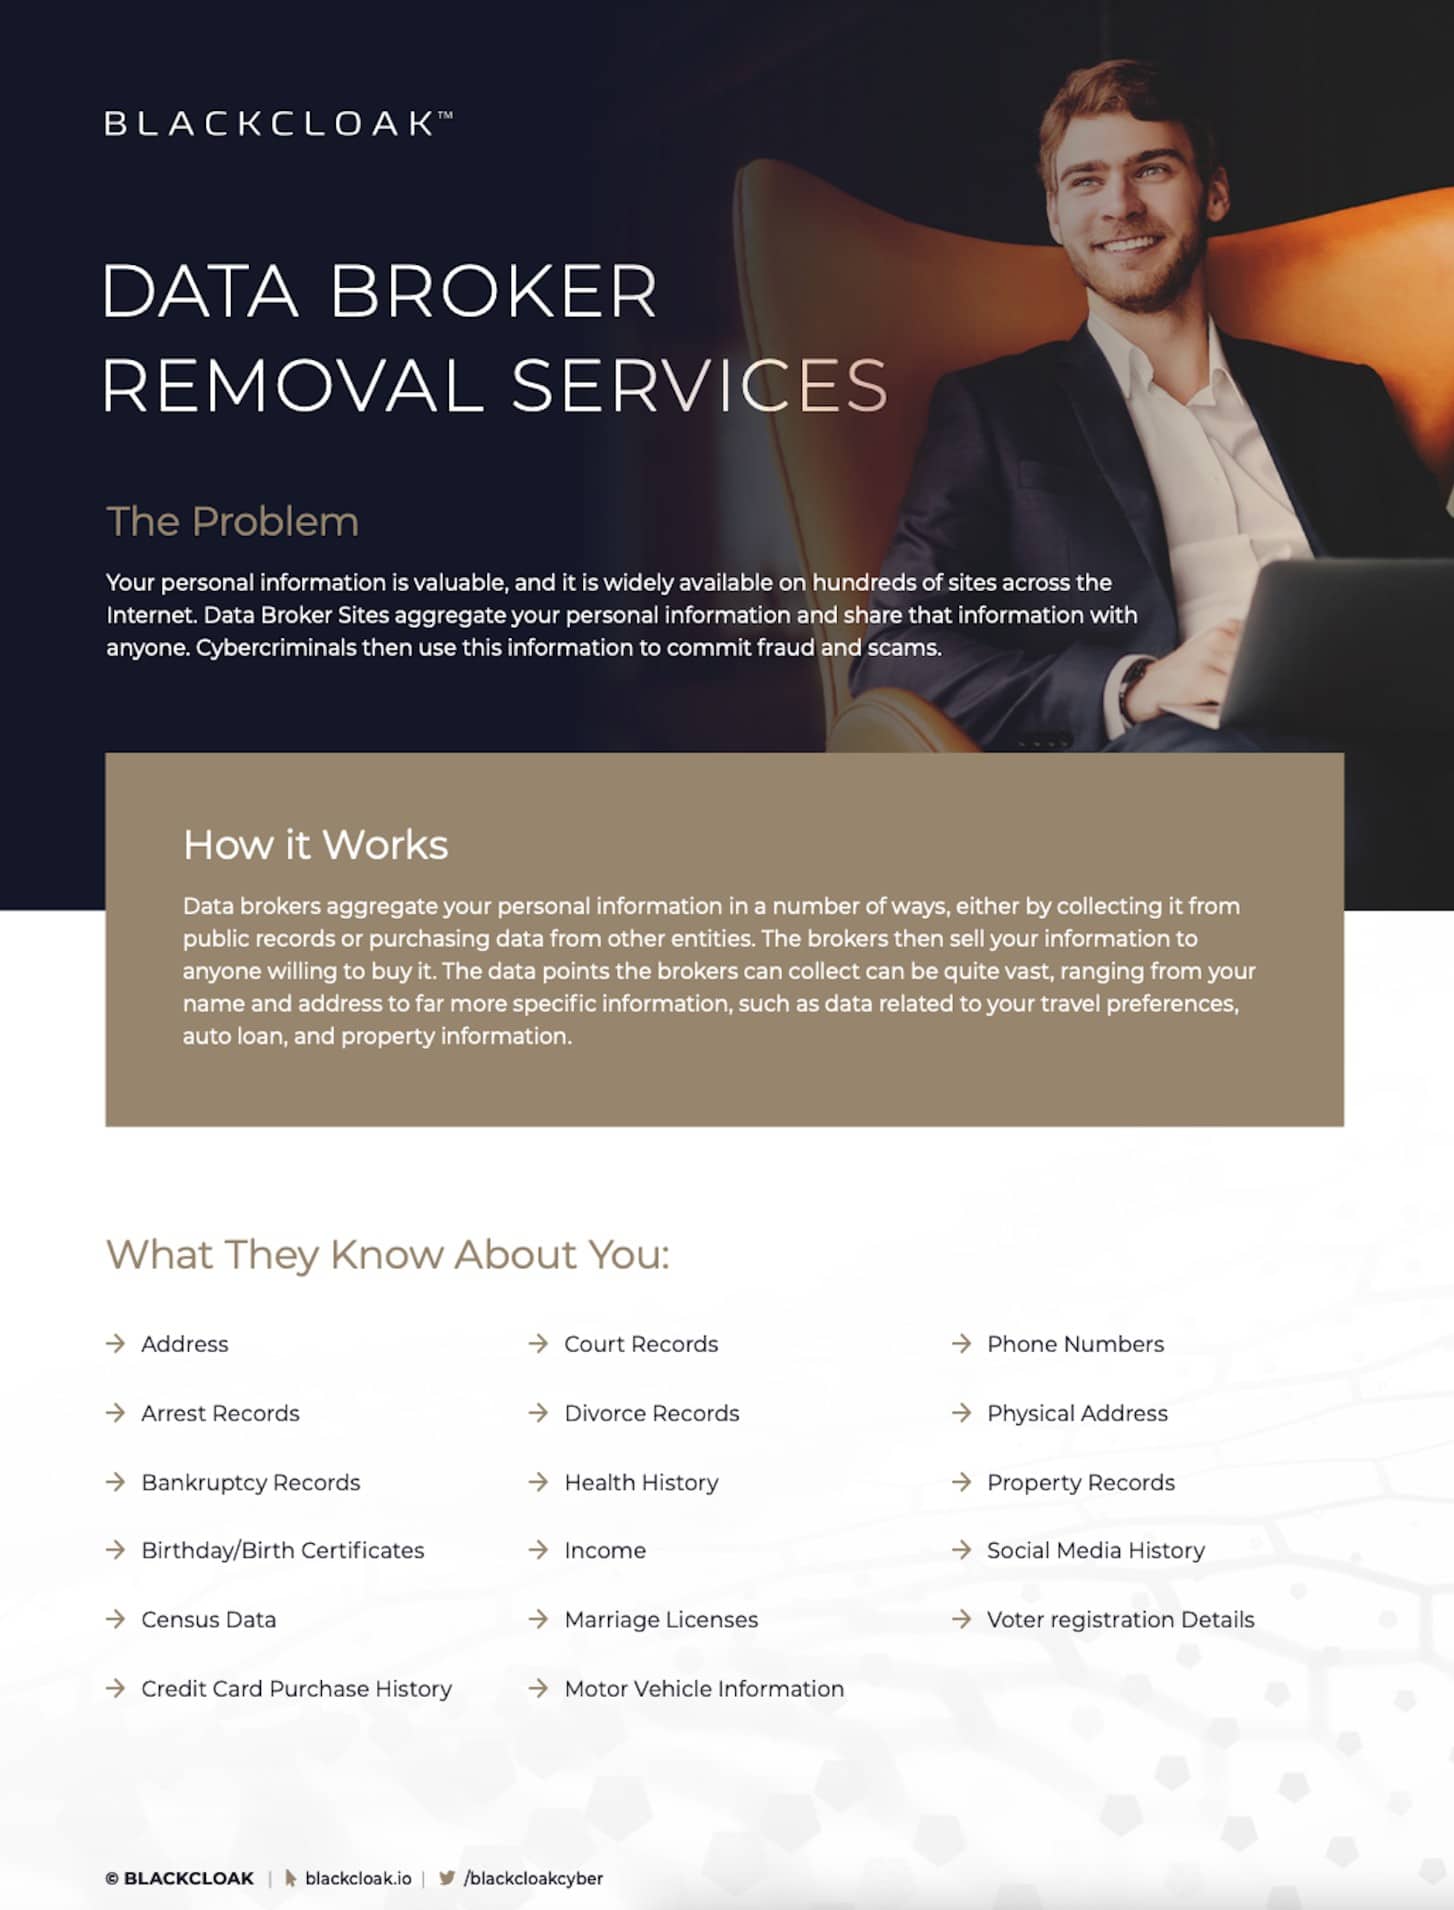 Data broker removal services